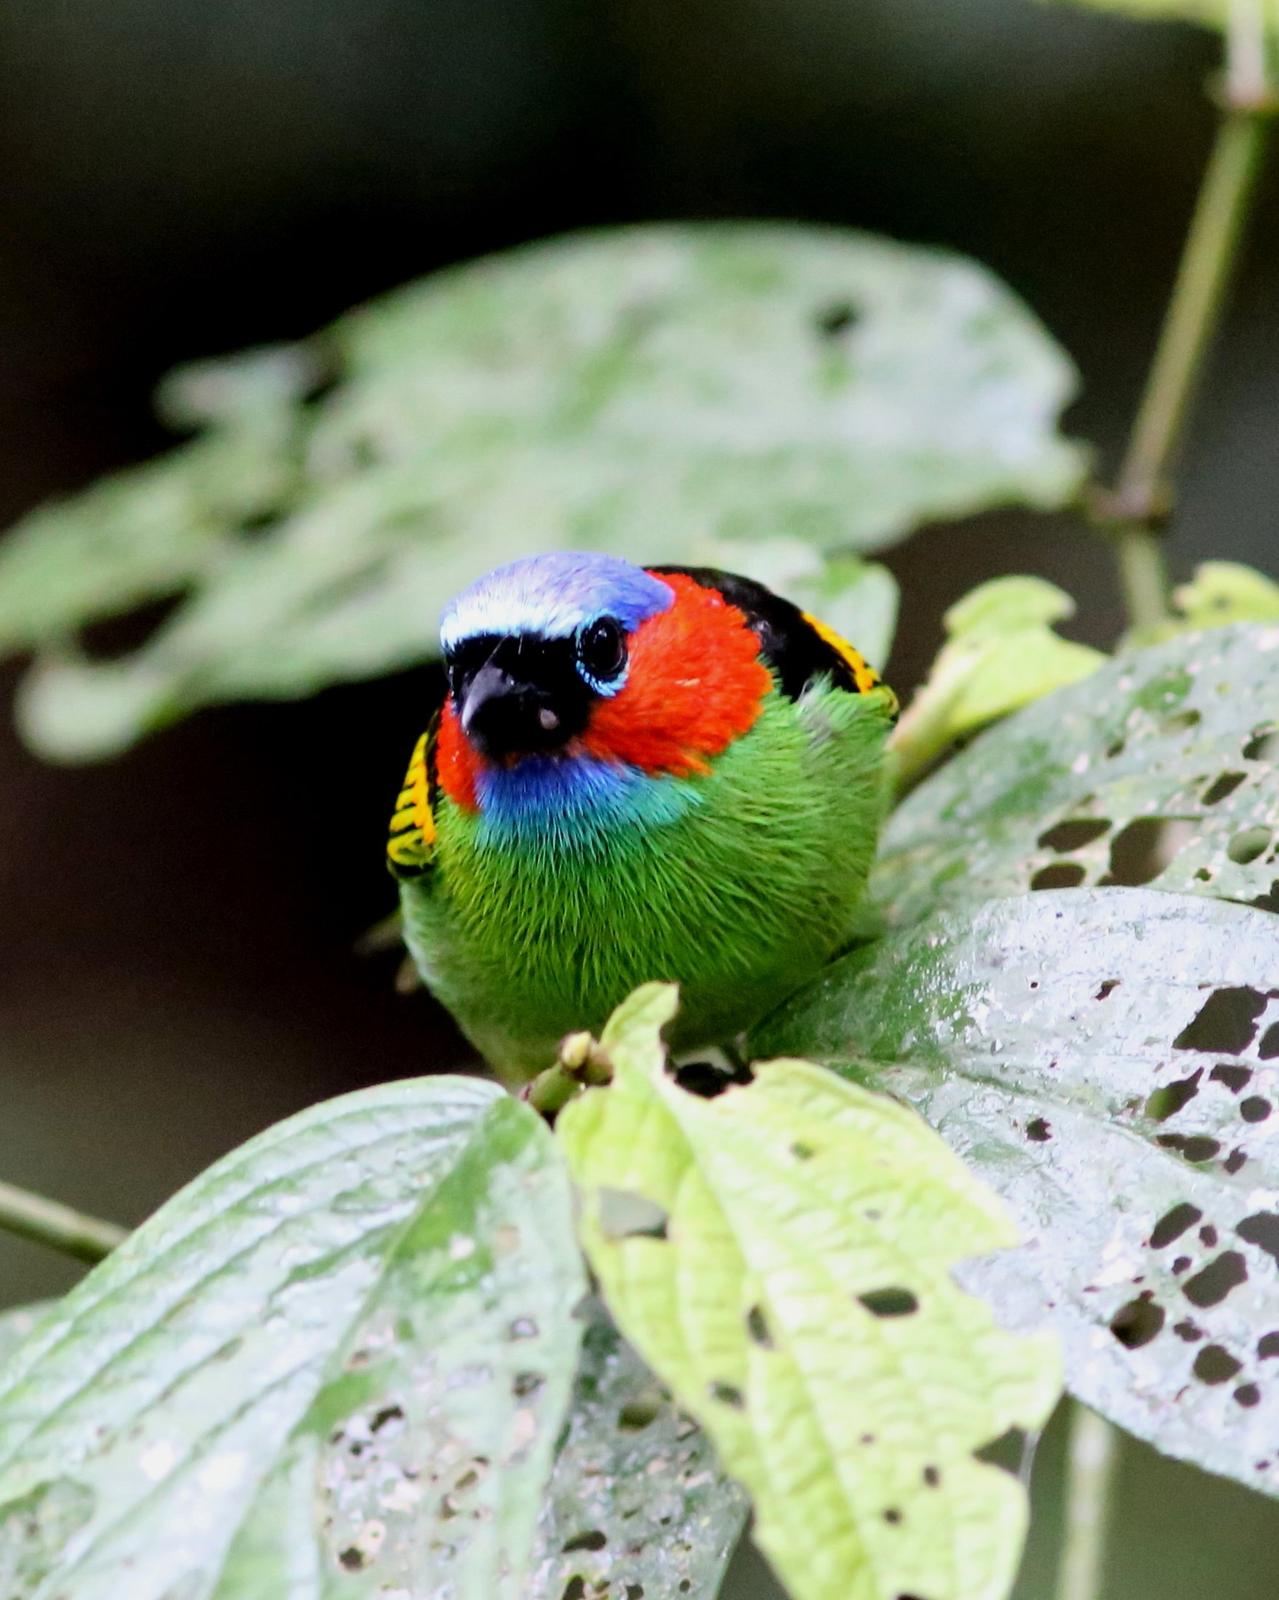 Red-necked Tanager Photo by Rohan van Twest